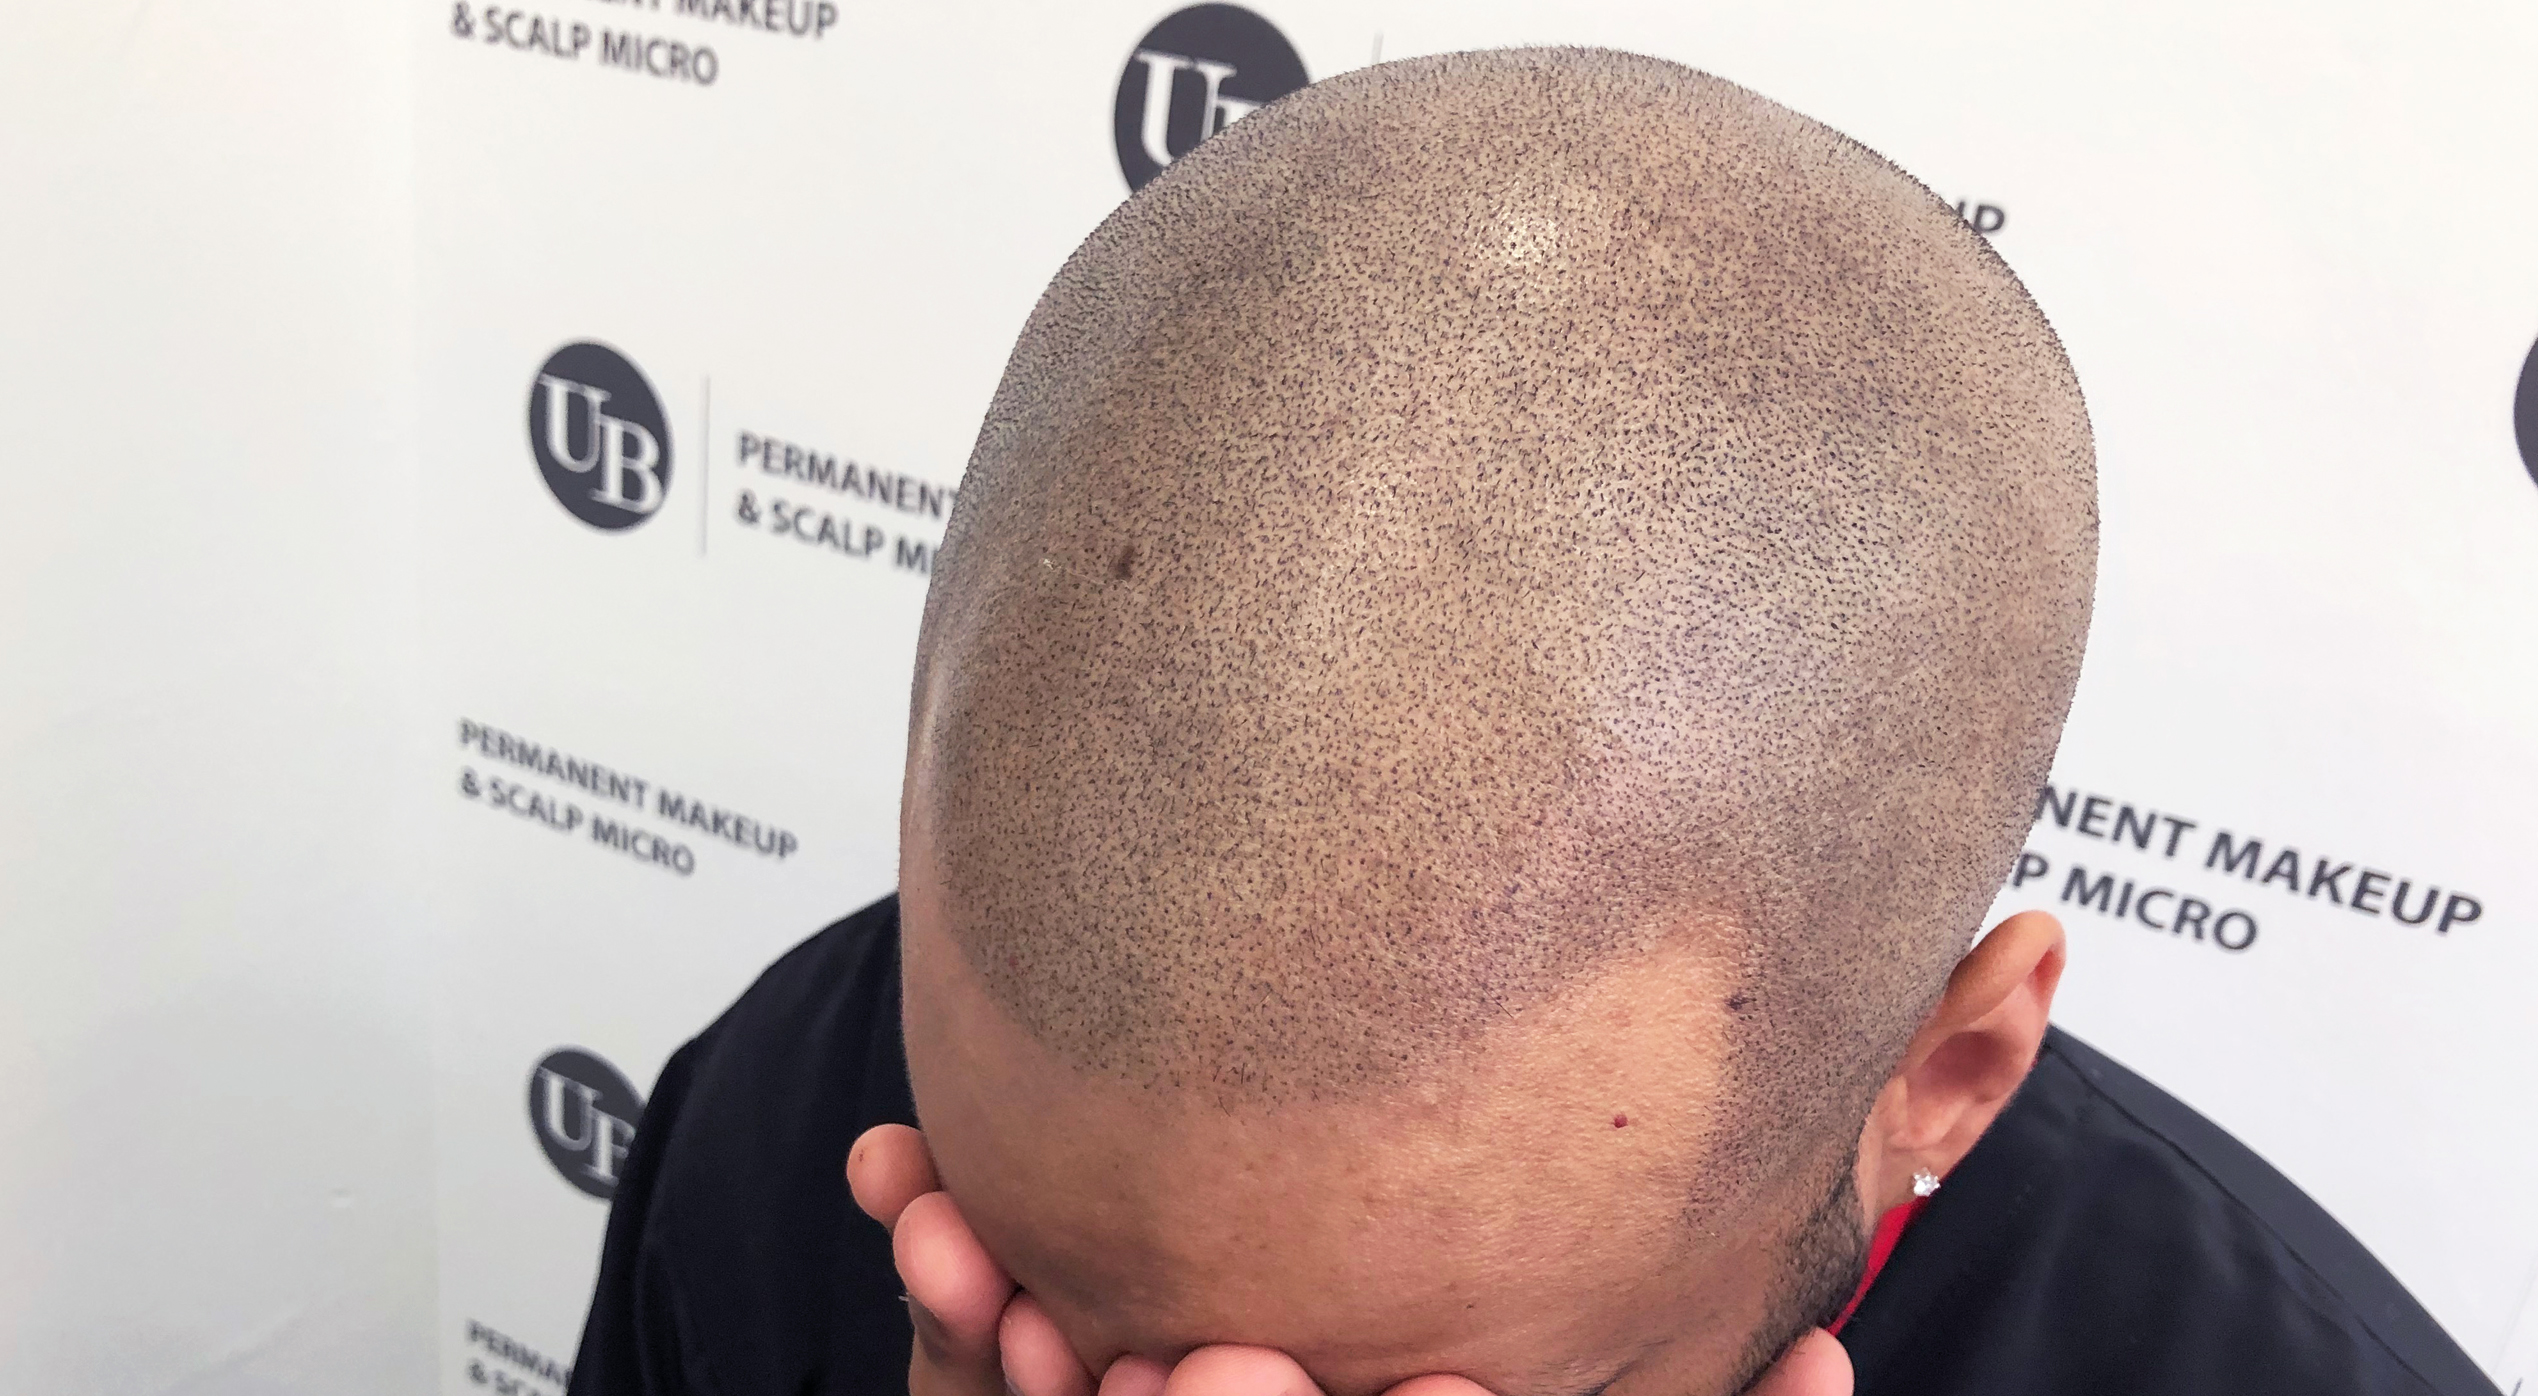 Hair Tattoo the best solution to hair loss by Shirley Marin - Unyozi Beauty  - Permanent Makeup & Scalp Micropigmentation